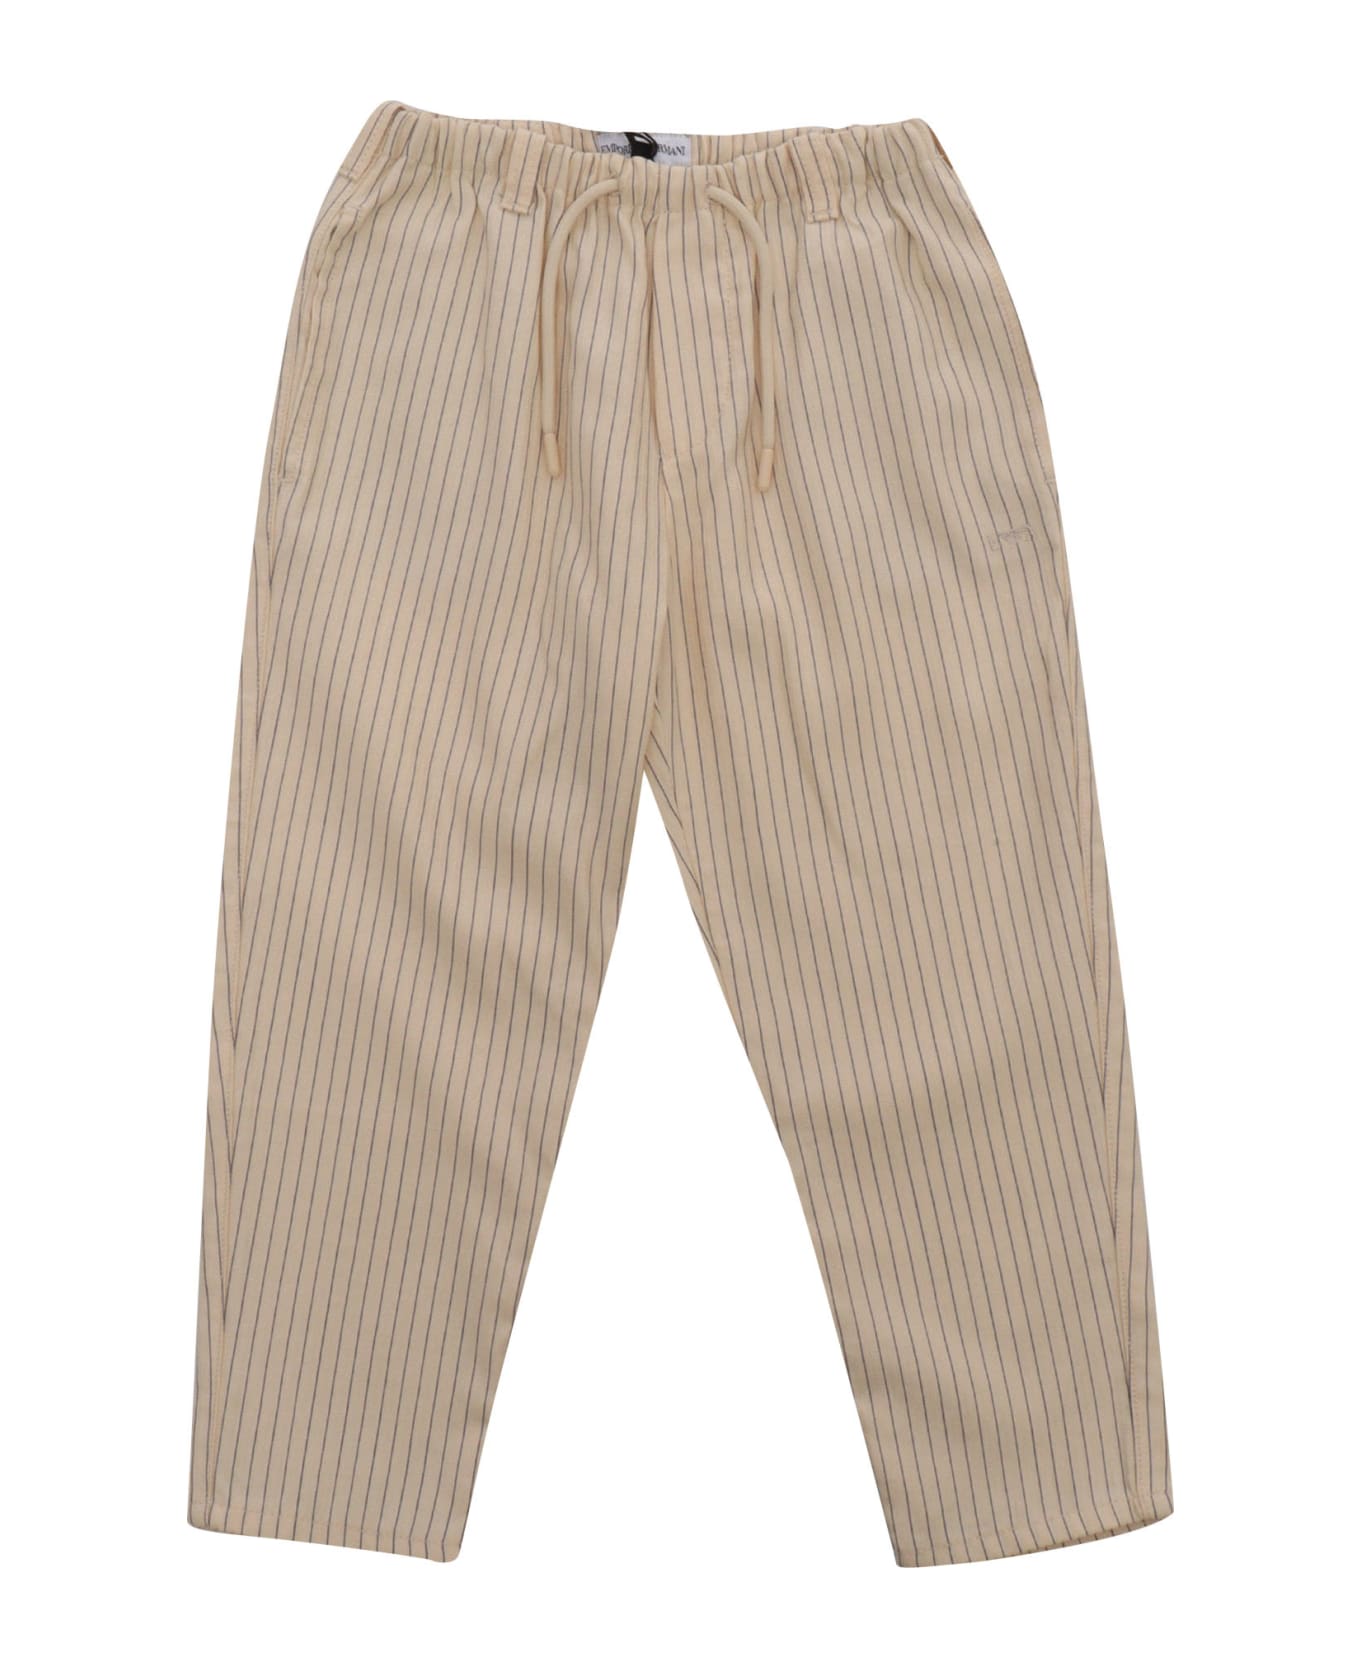 Emporio Armani Beige Trousers With Striped Pattern - BEIGE